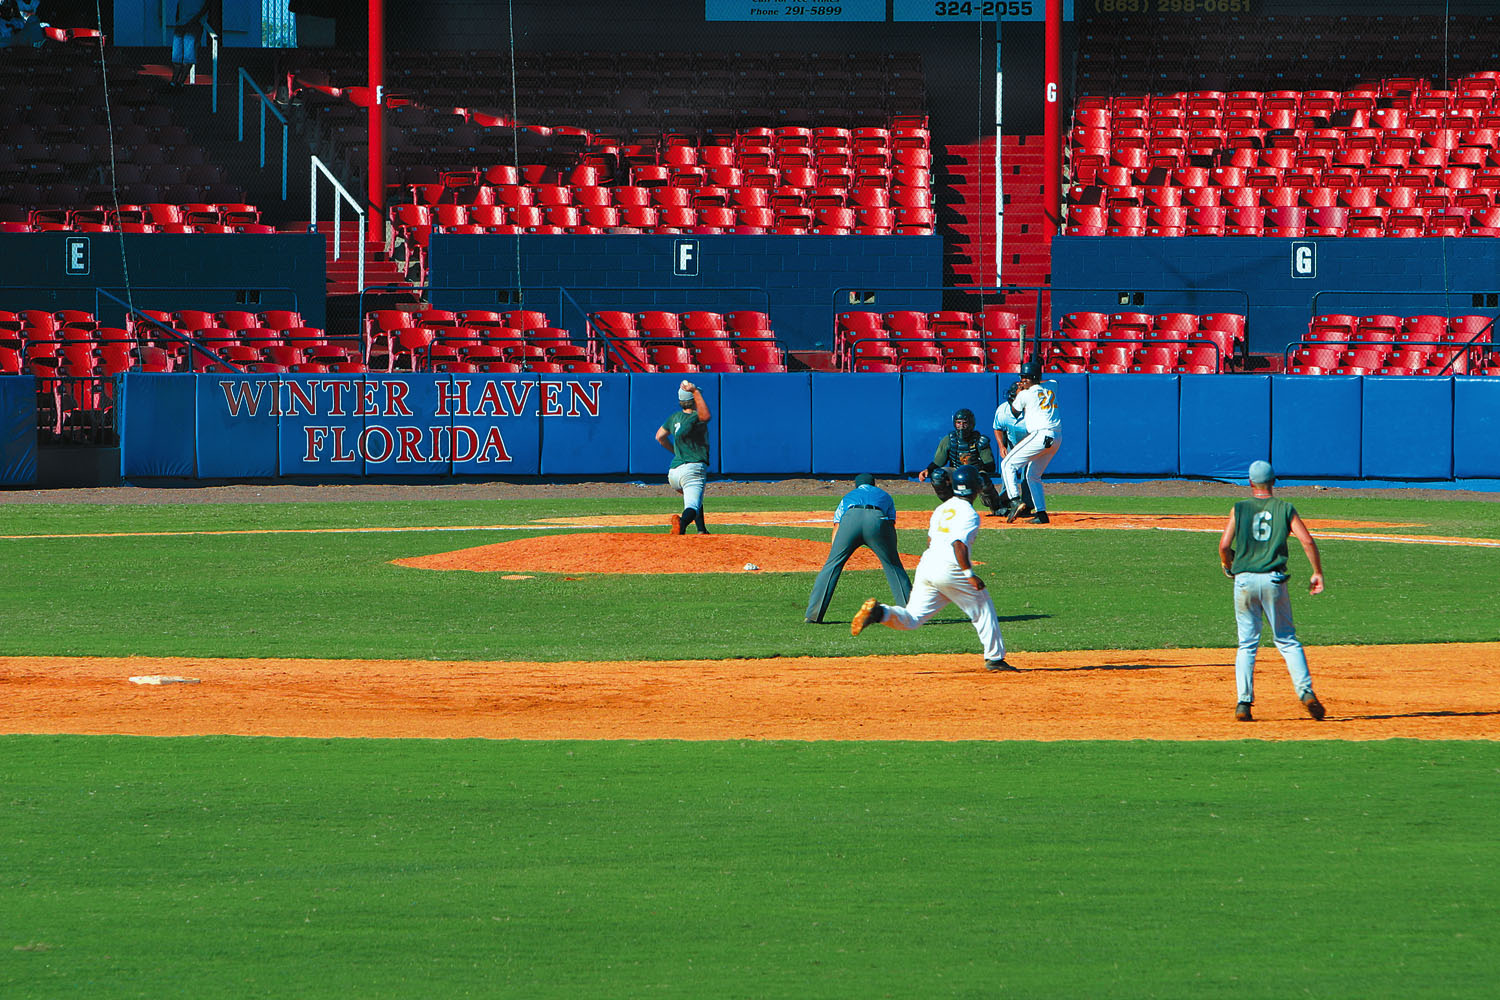 A baseball game at Chain Of Lakes Park in Winter Haven